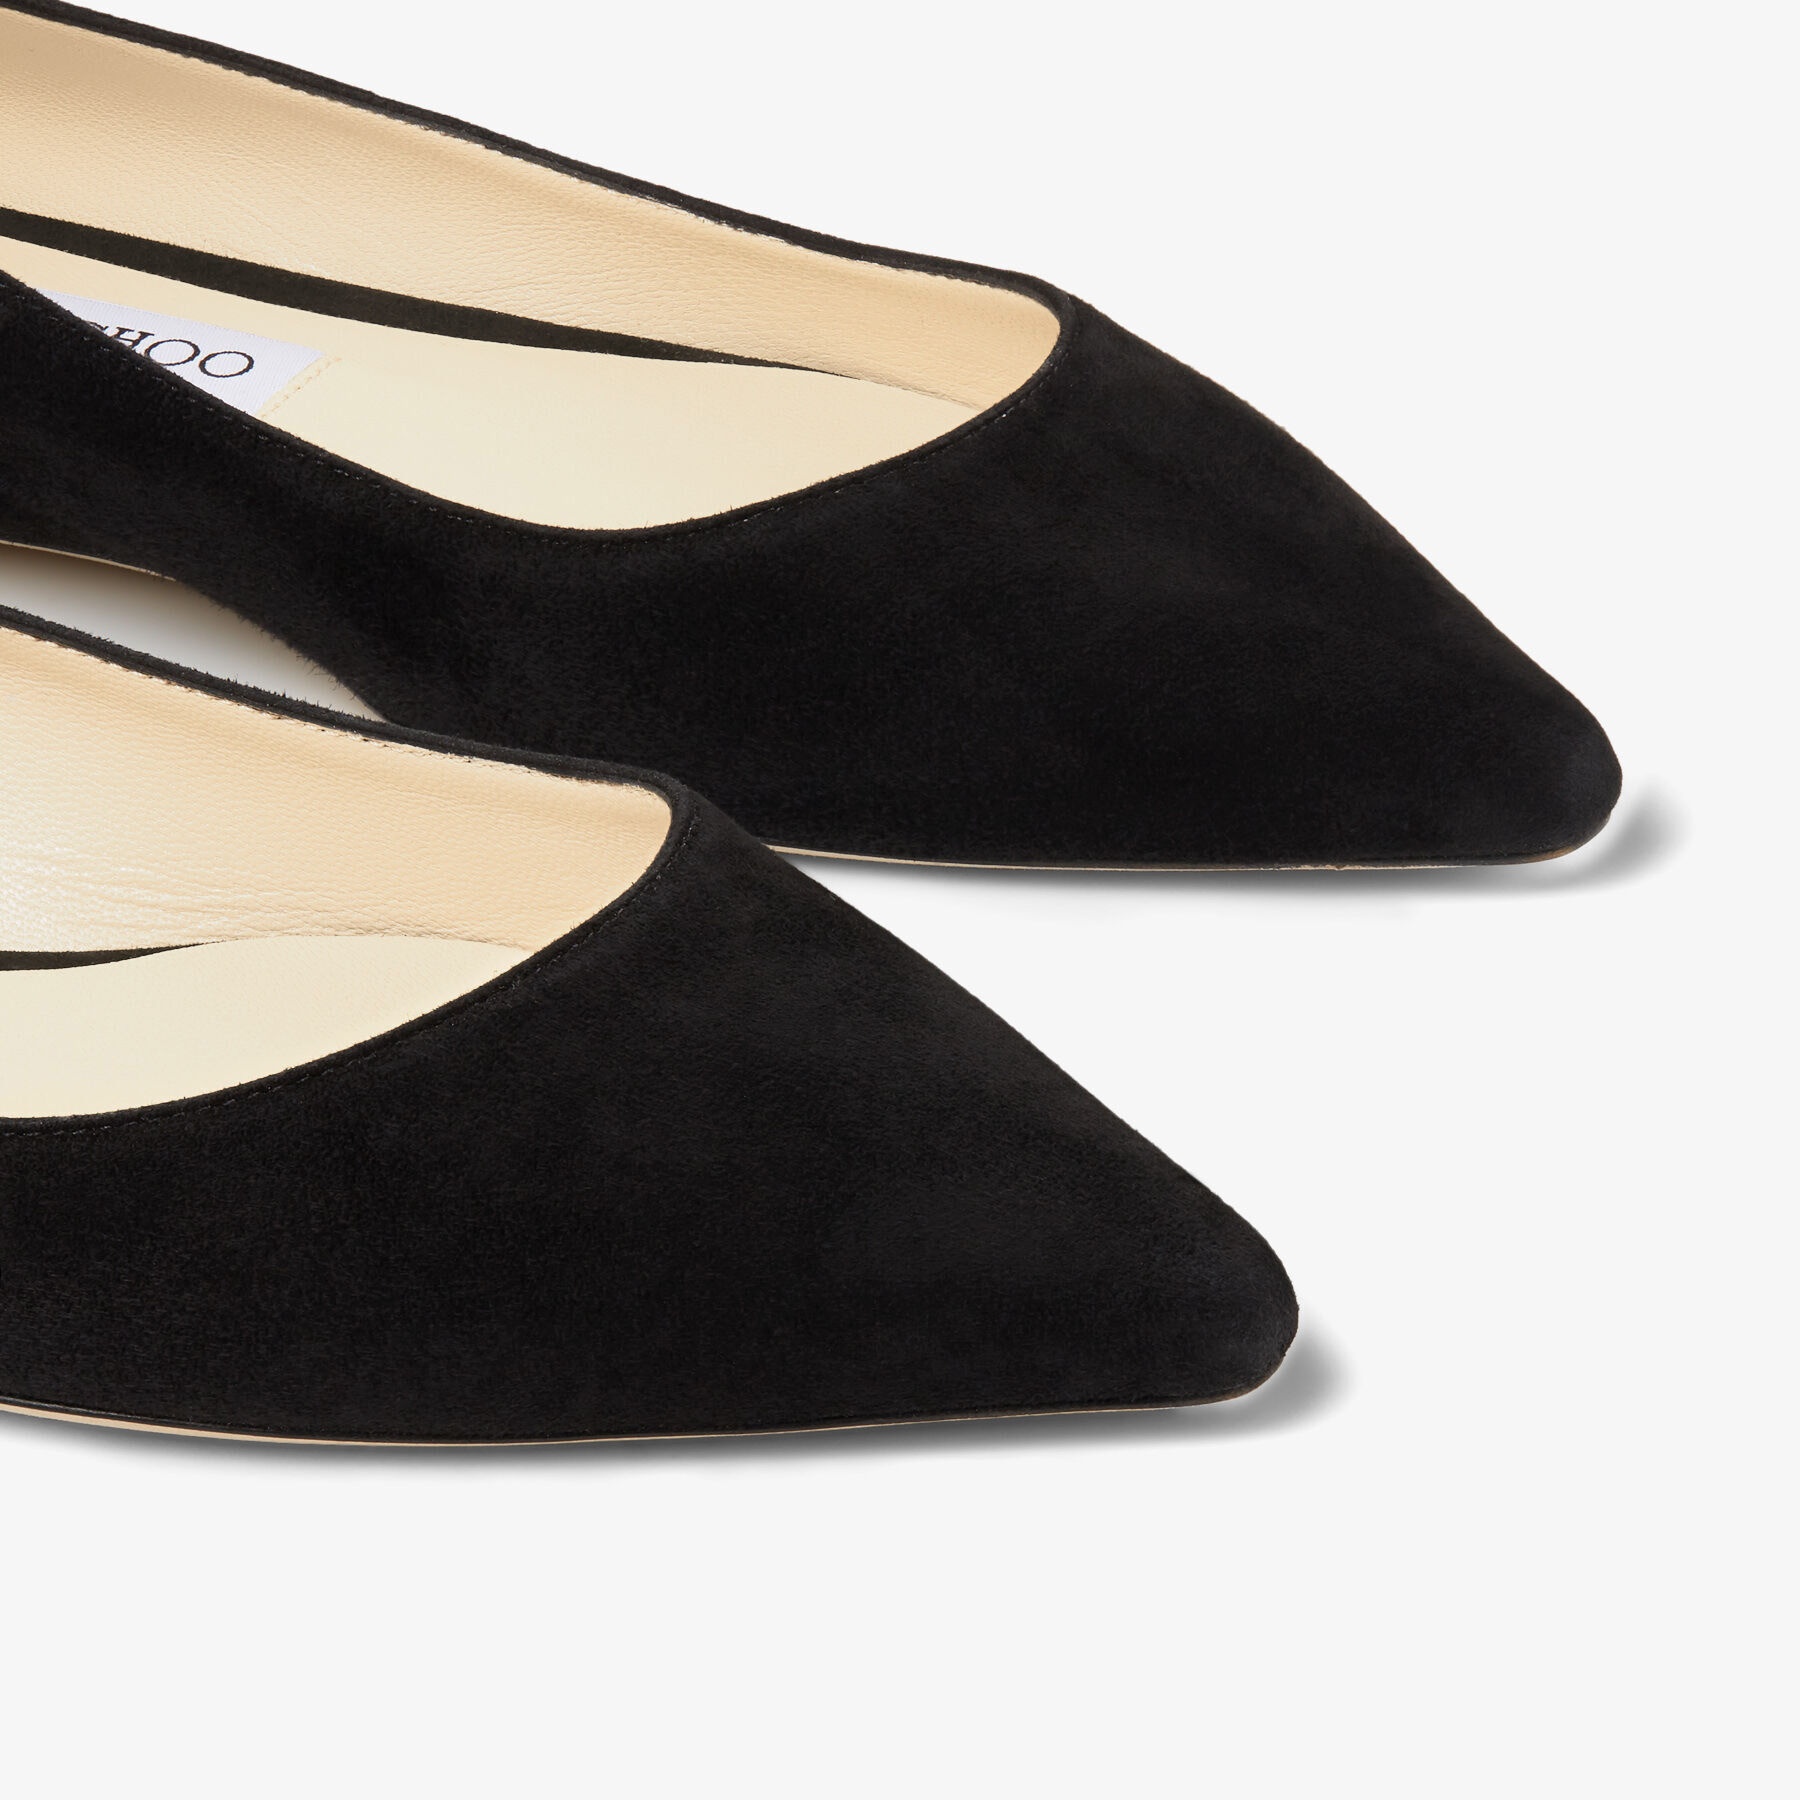 Romy Flat
Black Suede Pointy Toe Flats - 4